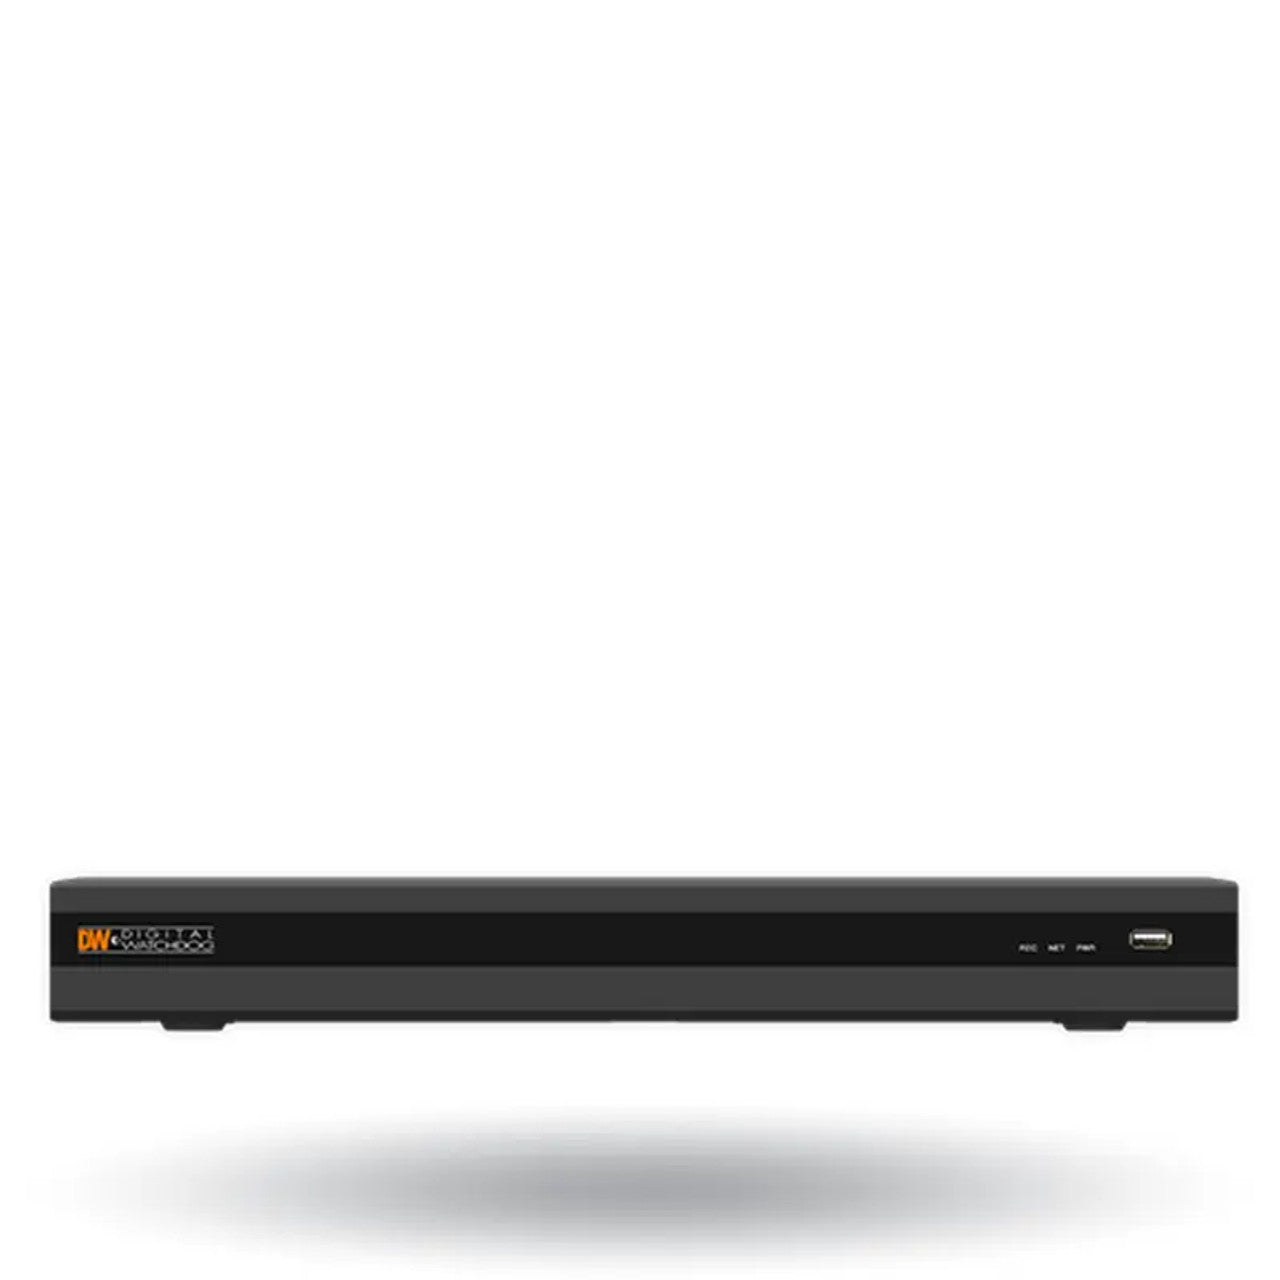 Digital Watchdog DW-VG41220T8P VMAX IP G4 8 Channel PoE NVR with 4 bonus channels with 20TB Hard Drive, 12-Channel